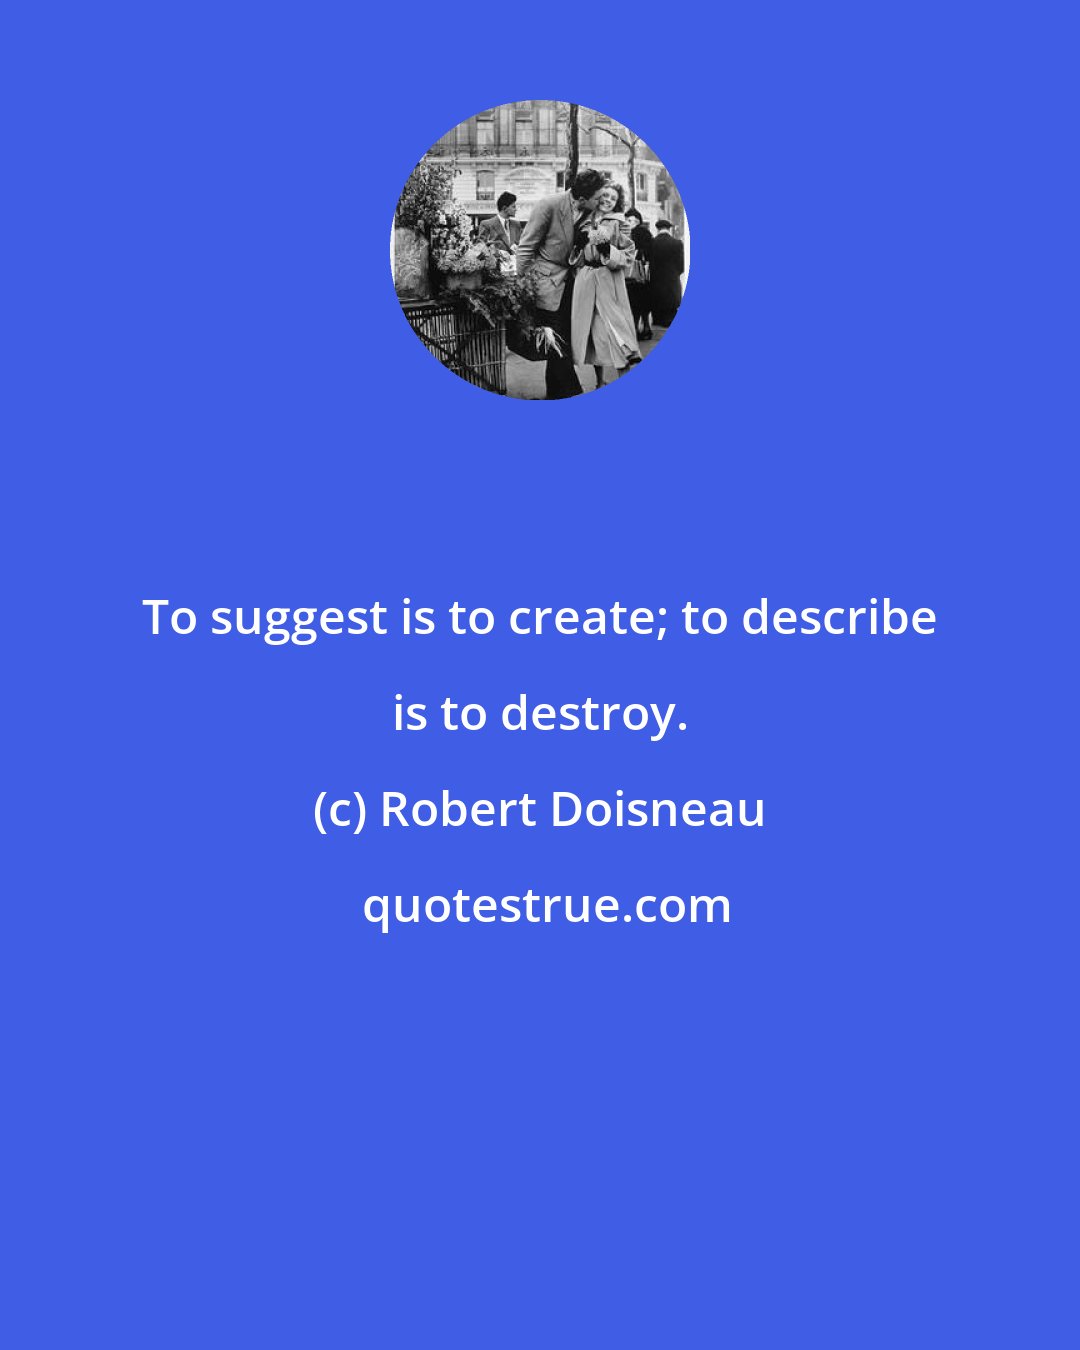 Robert Doisneau: To suggest is to create; to describe is to destroy.